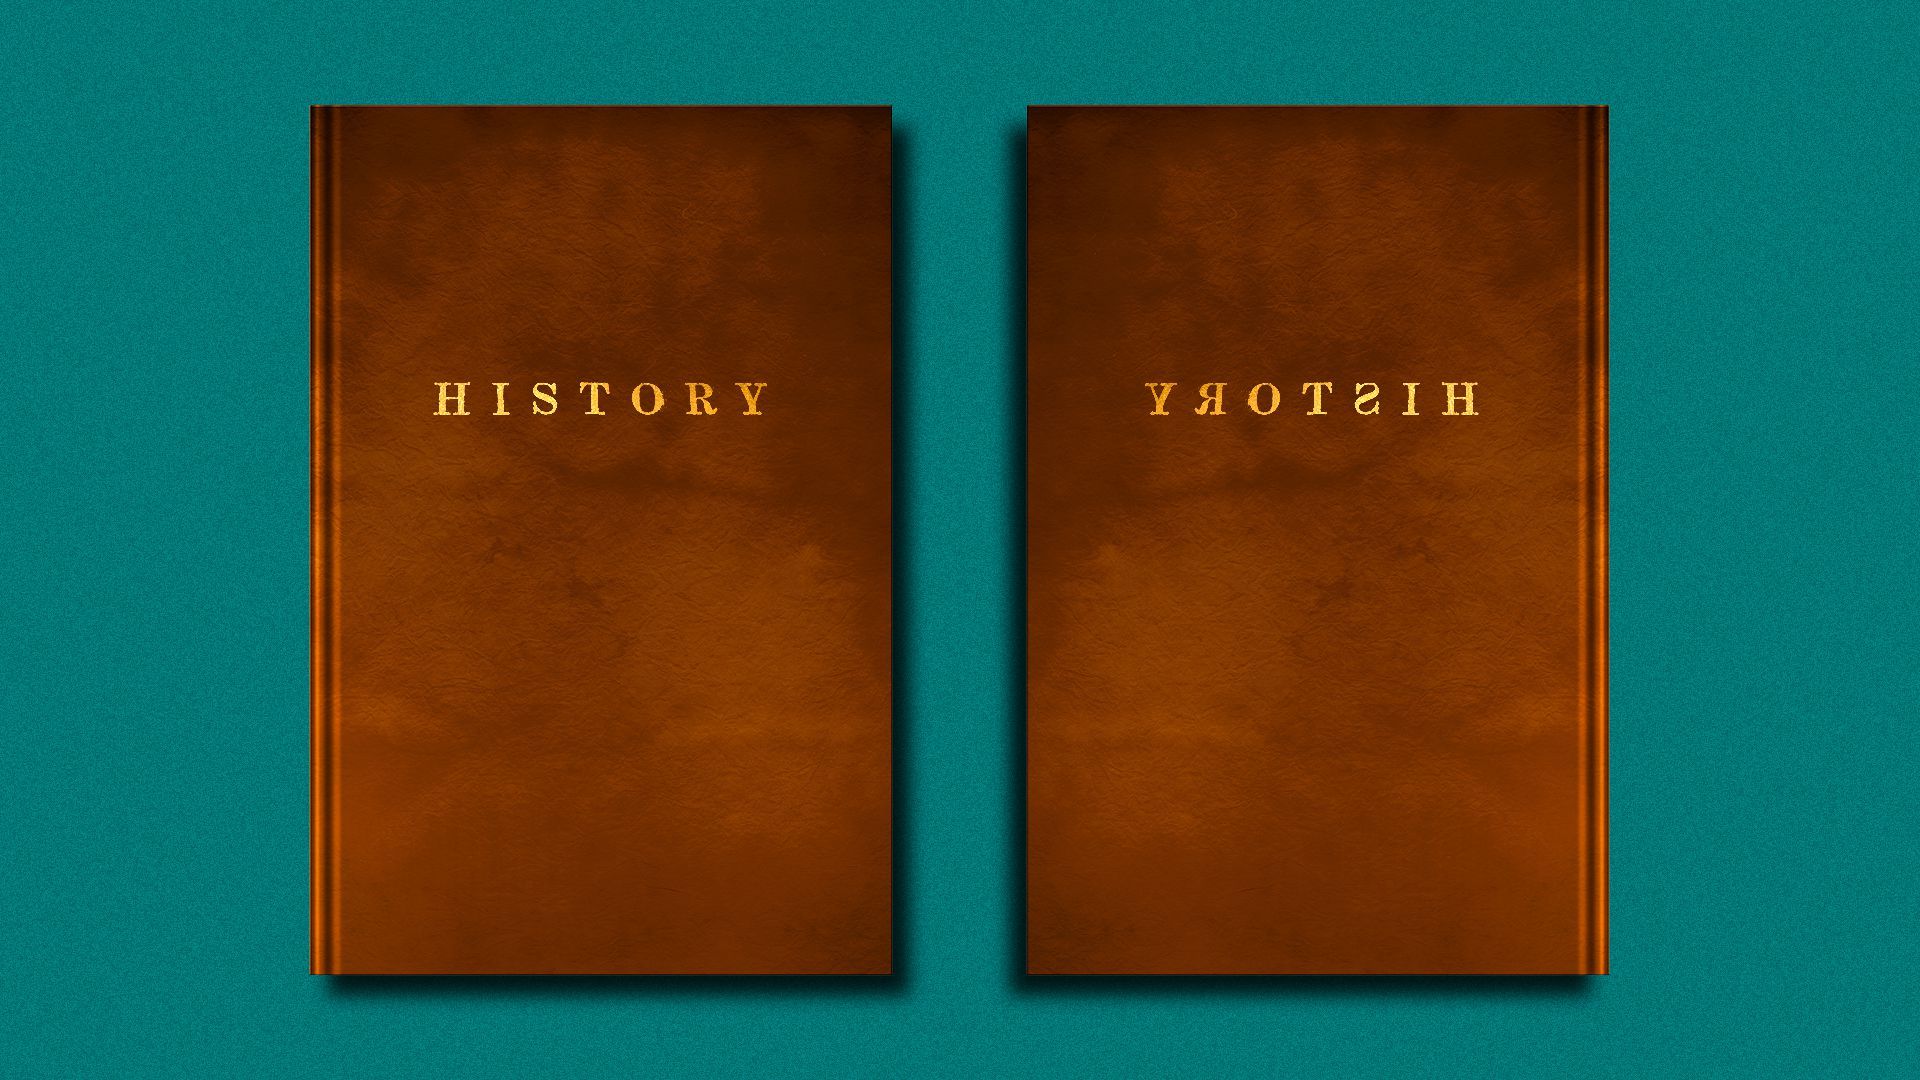 Illustration of two history books reflecting each other, one with the title written backwards